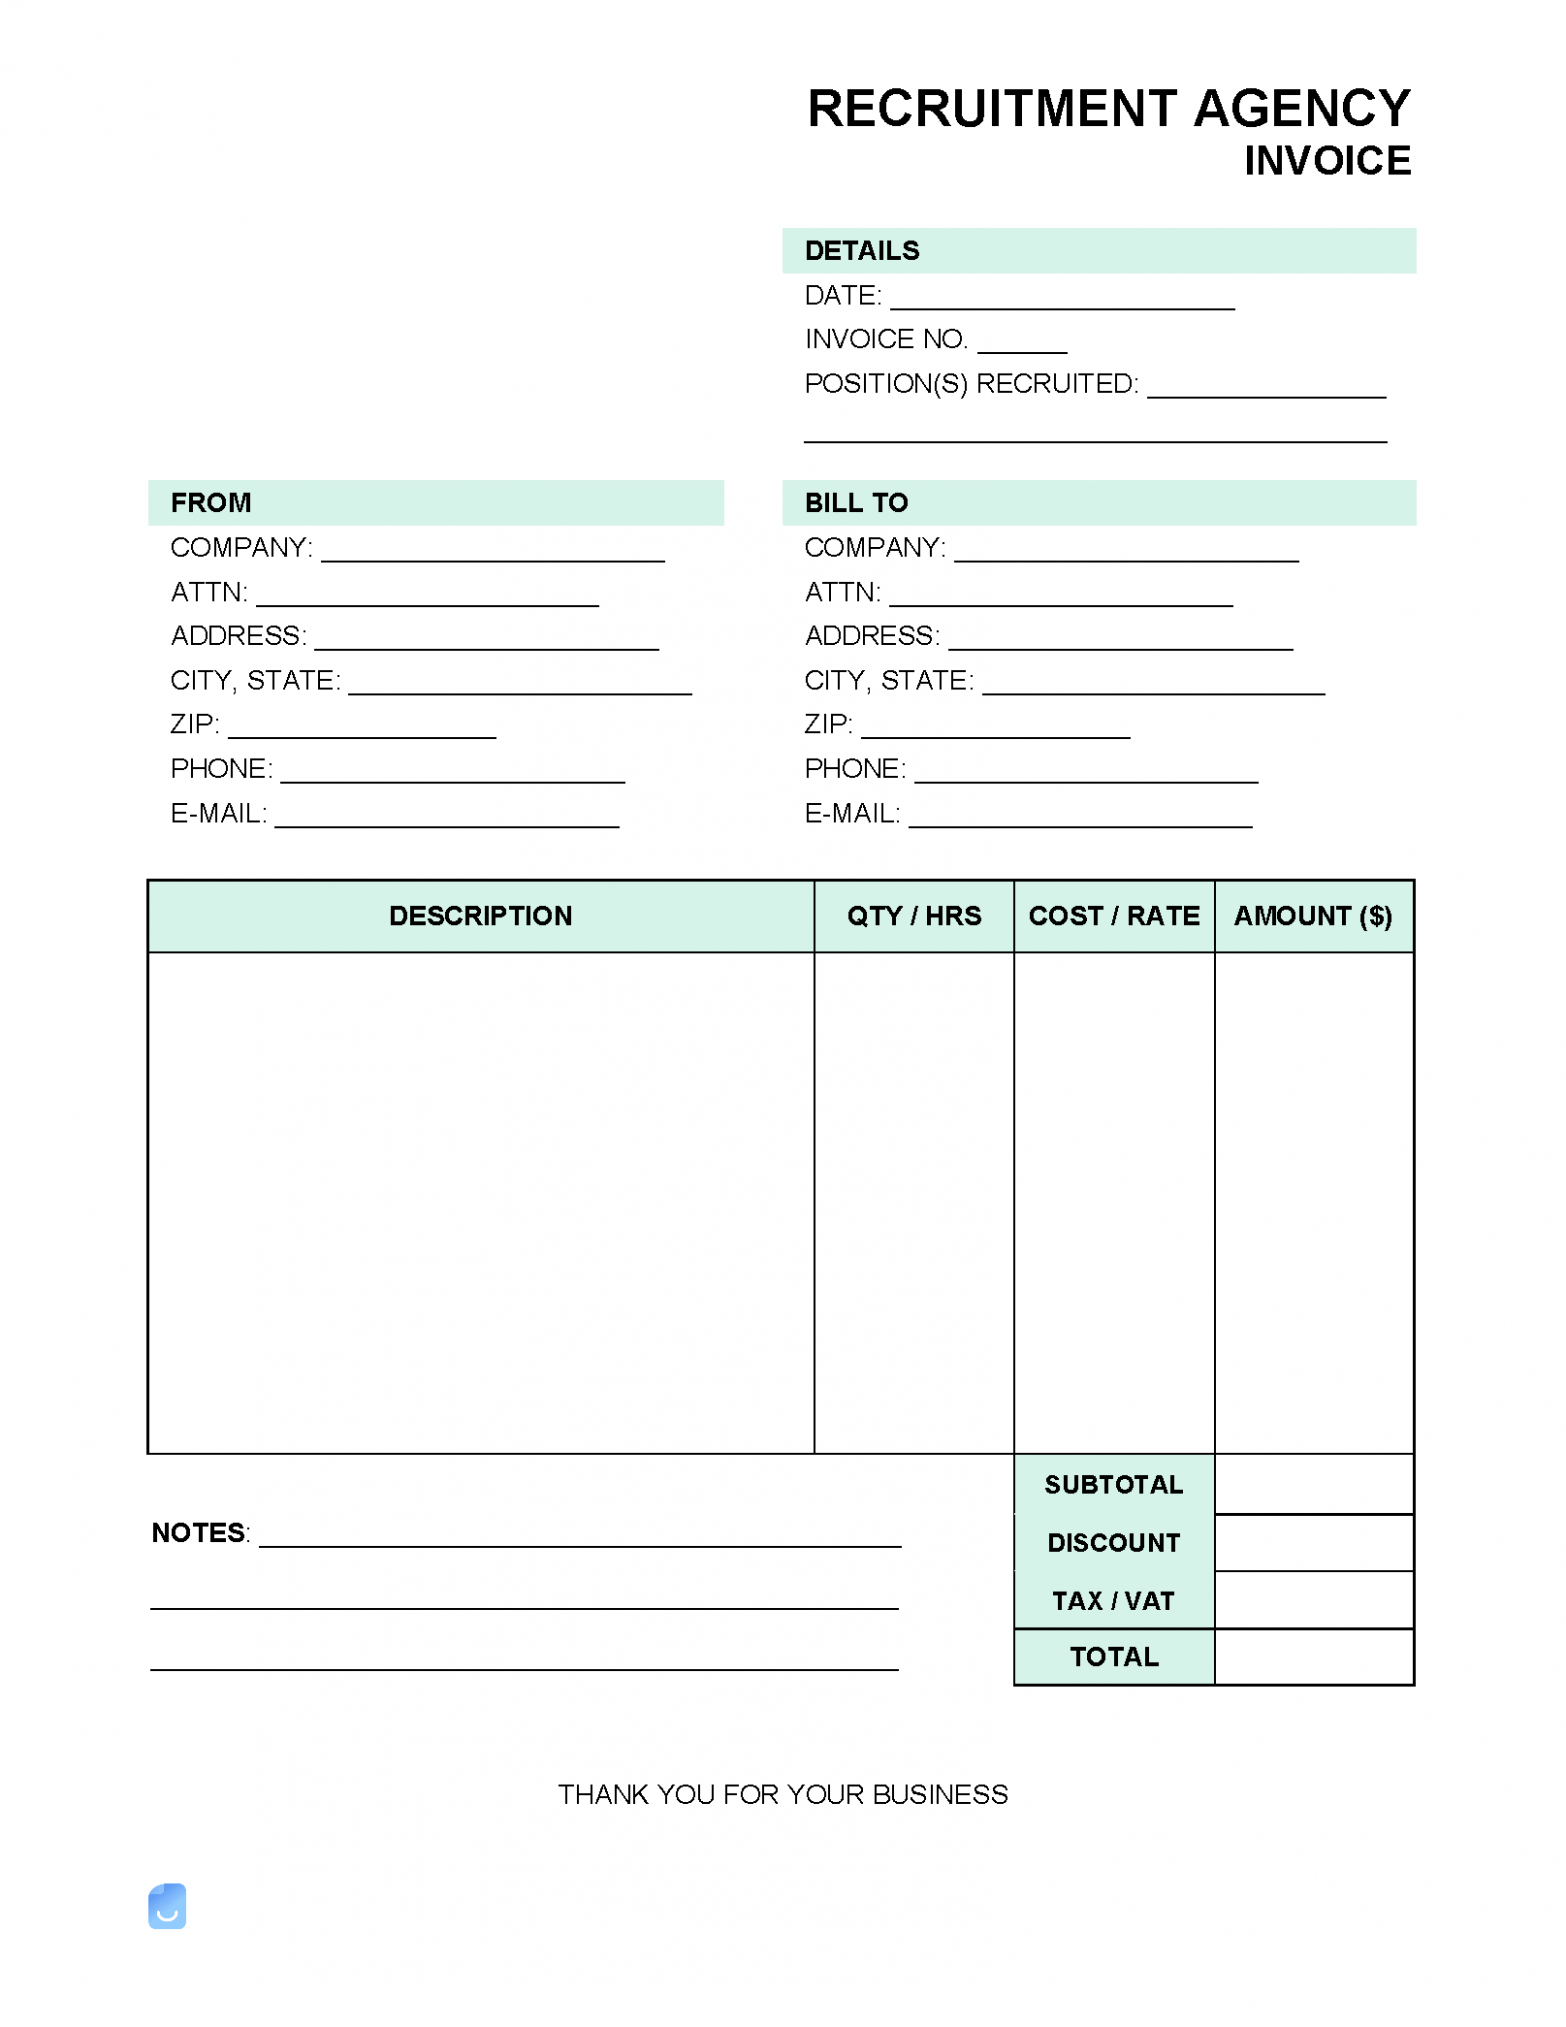 Printable Recruitment Agency Invoice Template 